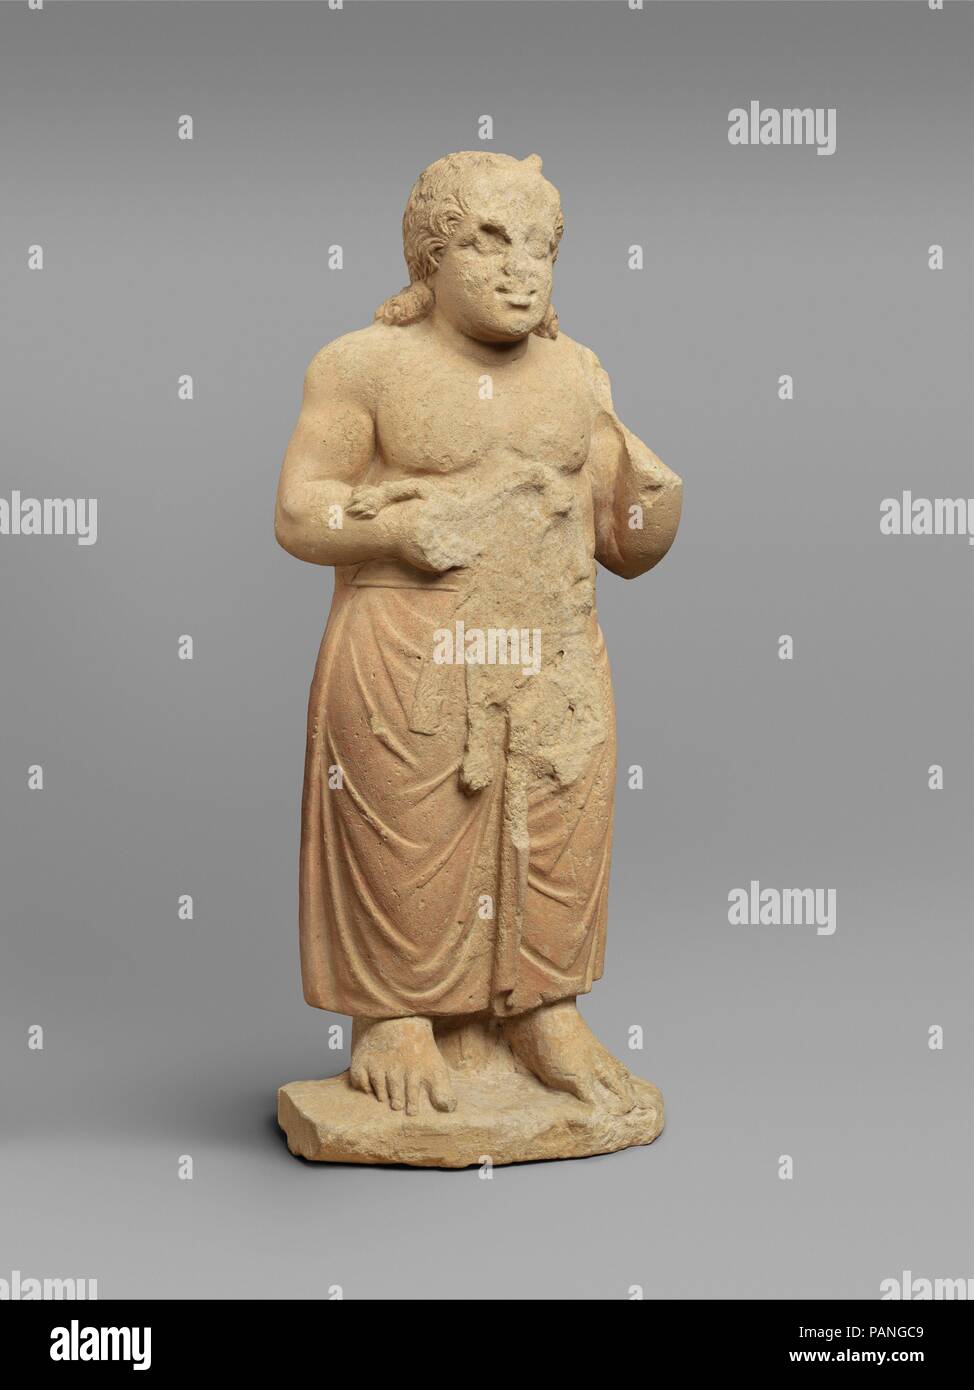 Limestone statue of a god. Culture: Cypriot. Dimensions: Overall: 23 1/2 x 9 1/8 x 5 1/4 in. (59.7 x 23.2 x 13.3 cm). Date: 3rd century B.C..  The identity of this young plump figure with horns at his forehead and a lion in his right hand is uncertain. Although Herakles is usually shown with a lion, statues of the young Herakles are more likely to show him with the snake that he strangled while still in the cradle. Moreover, Herakles does not appear with animal horns. Possibly Bes, an Egyptian god with a lion's face, is shown here in a Cypriot adaptation. On Cyprus, Bes is sometimes shown with Stock Photo